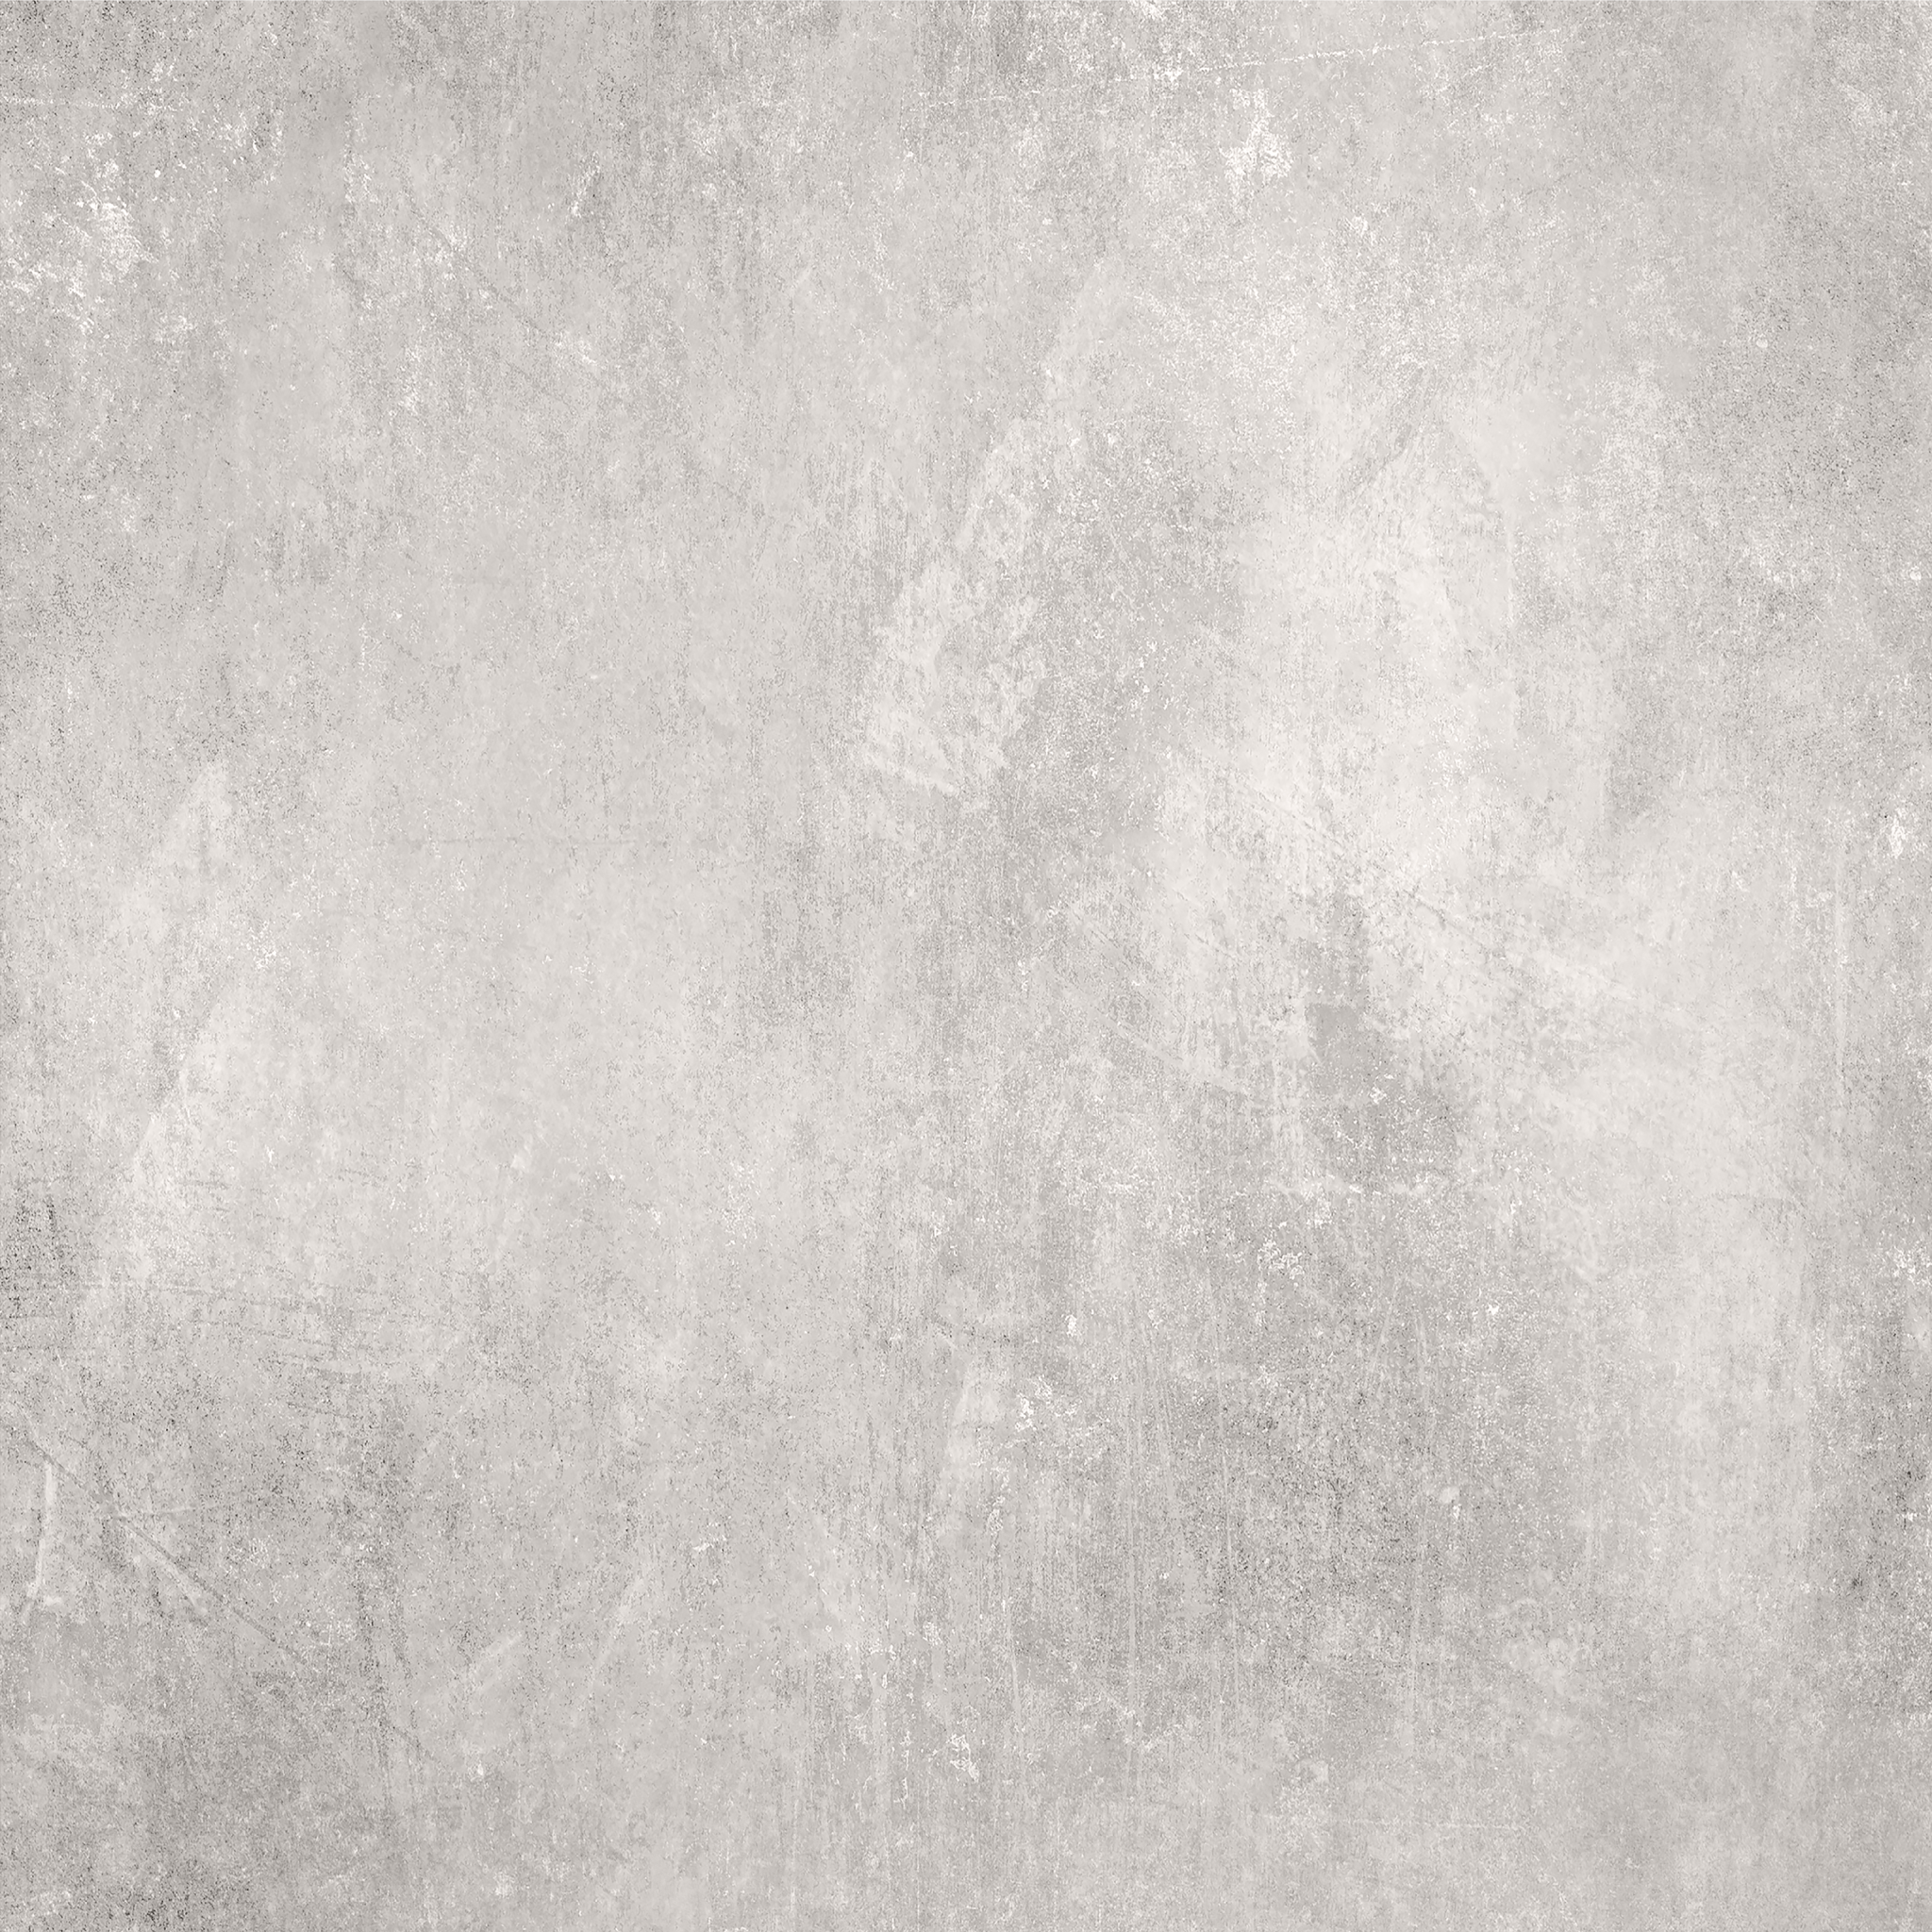 Close-up of Venetian plaster wallpaper texture, demonstrating the intricate details and subtle color variations for a sophisticated and luxurious wall finish